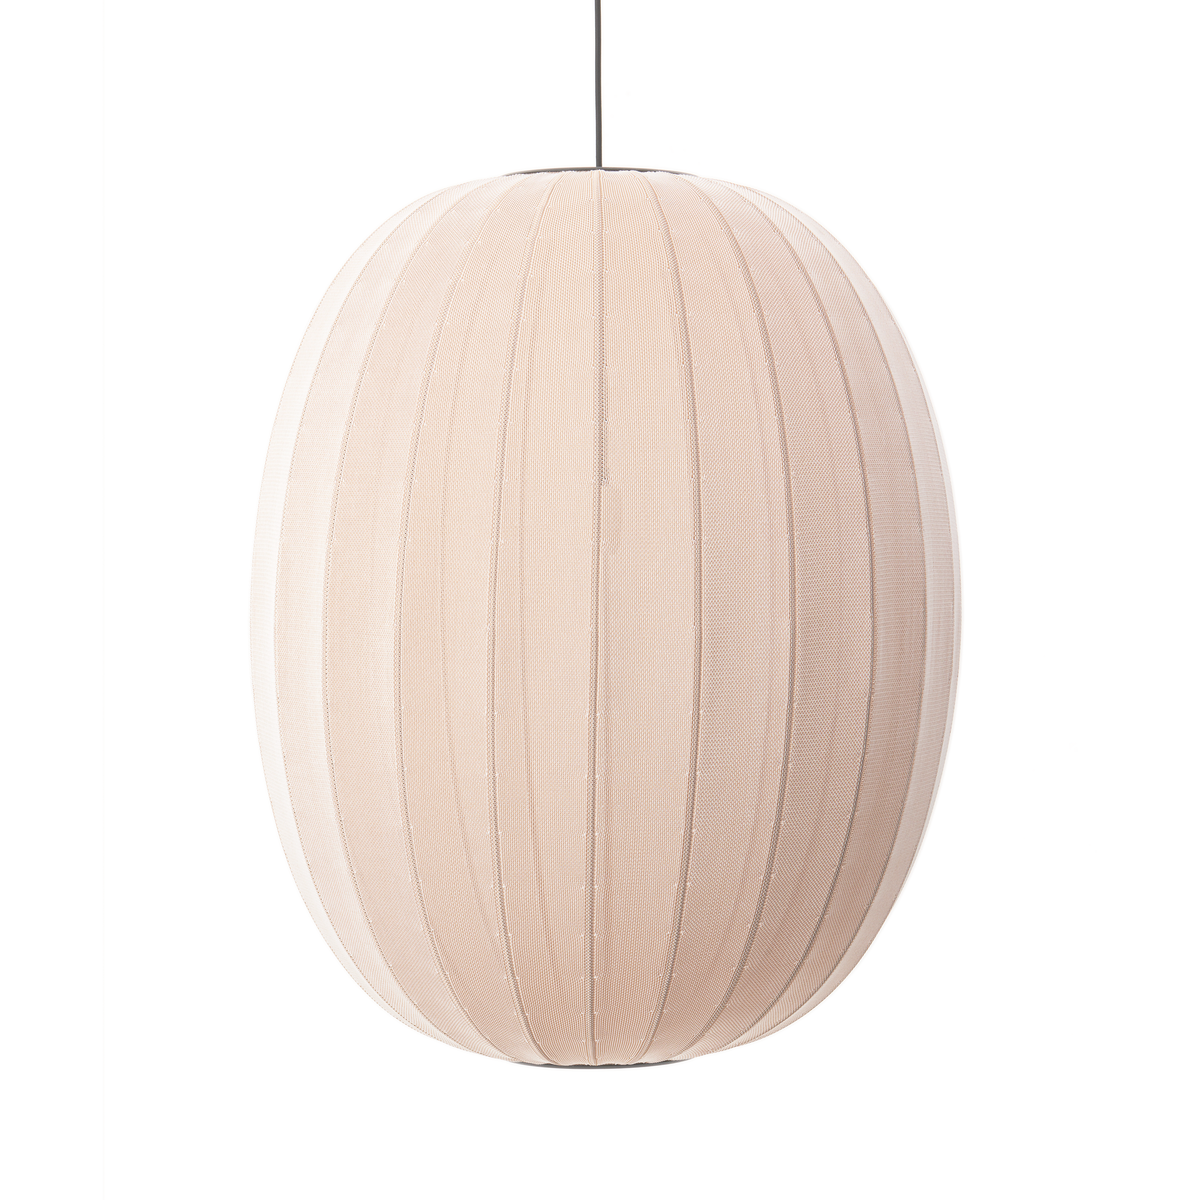 Made by Hand, Knit-Wit Pendant Lamp 65, Light Pink, Pendant,